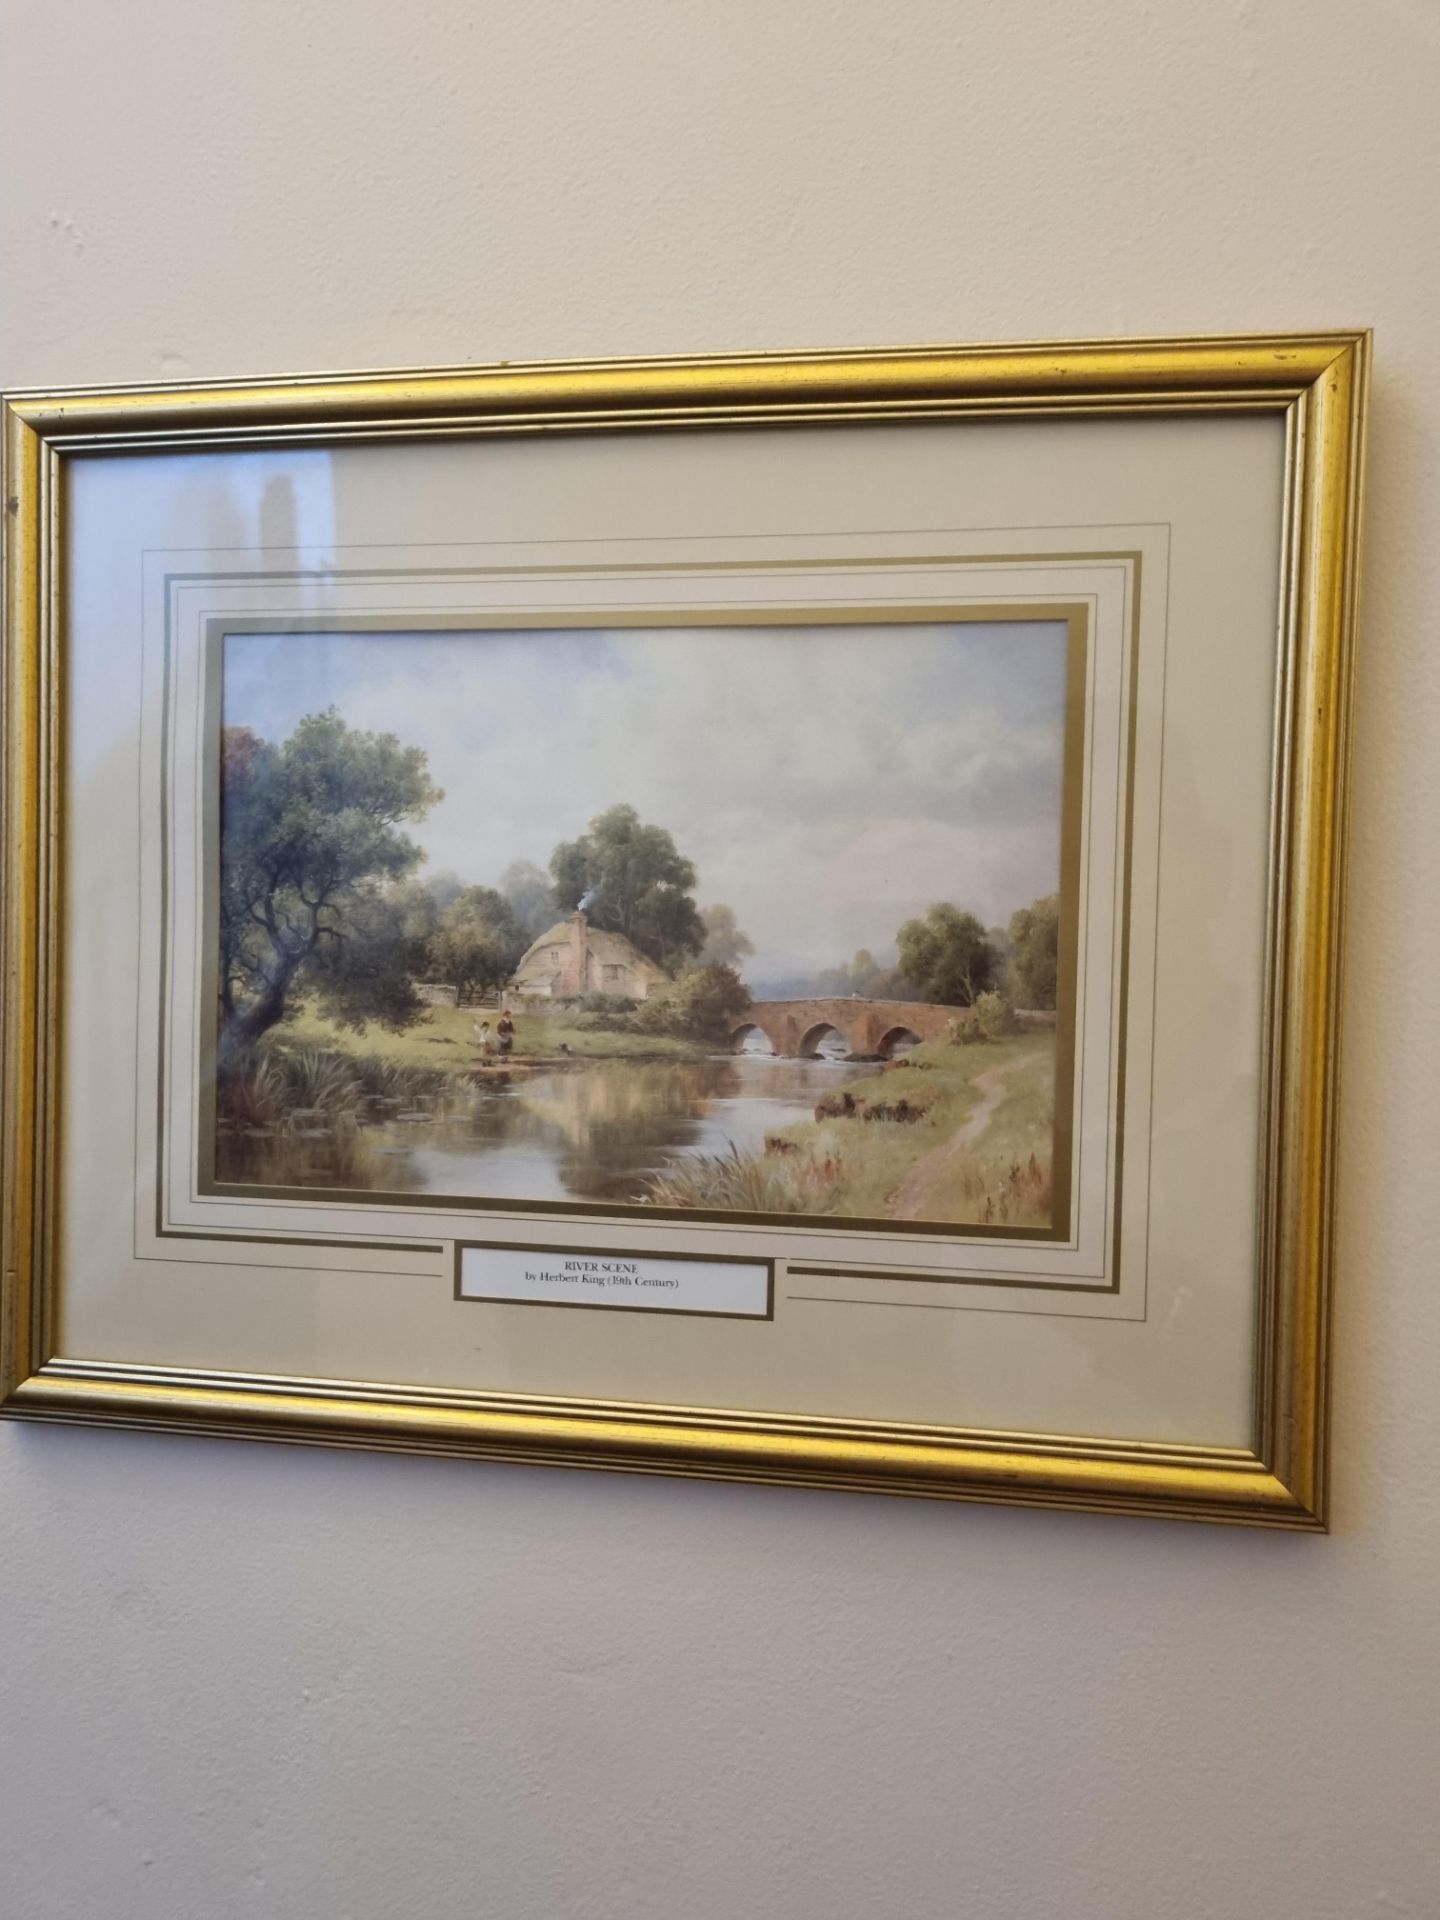 3x Prints390mm 310mm Comprising Of; The Meeting By Heywood Hardy 1843-1933 Wooden Frame With Gold